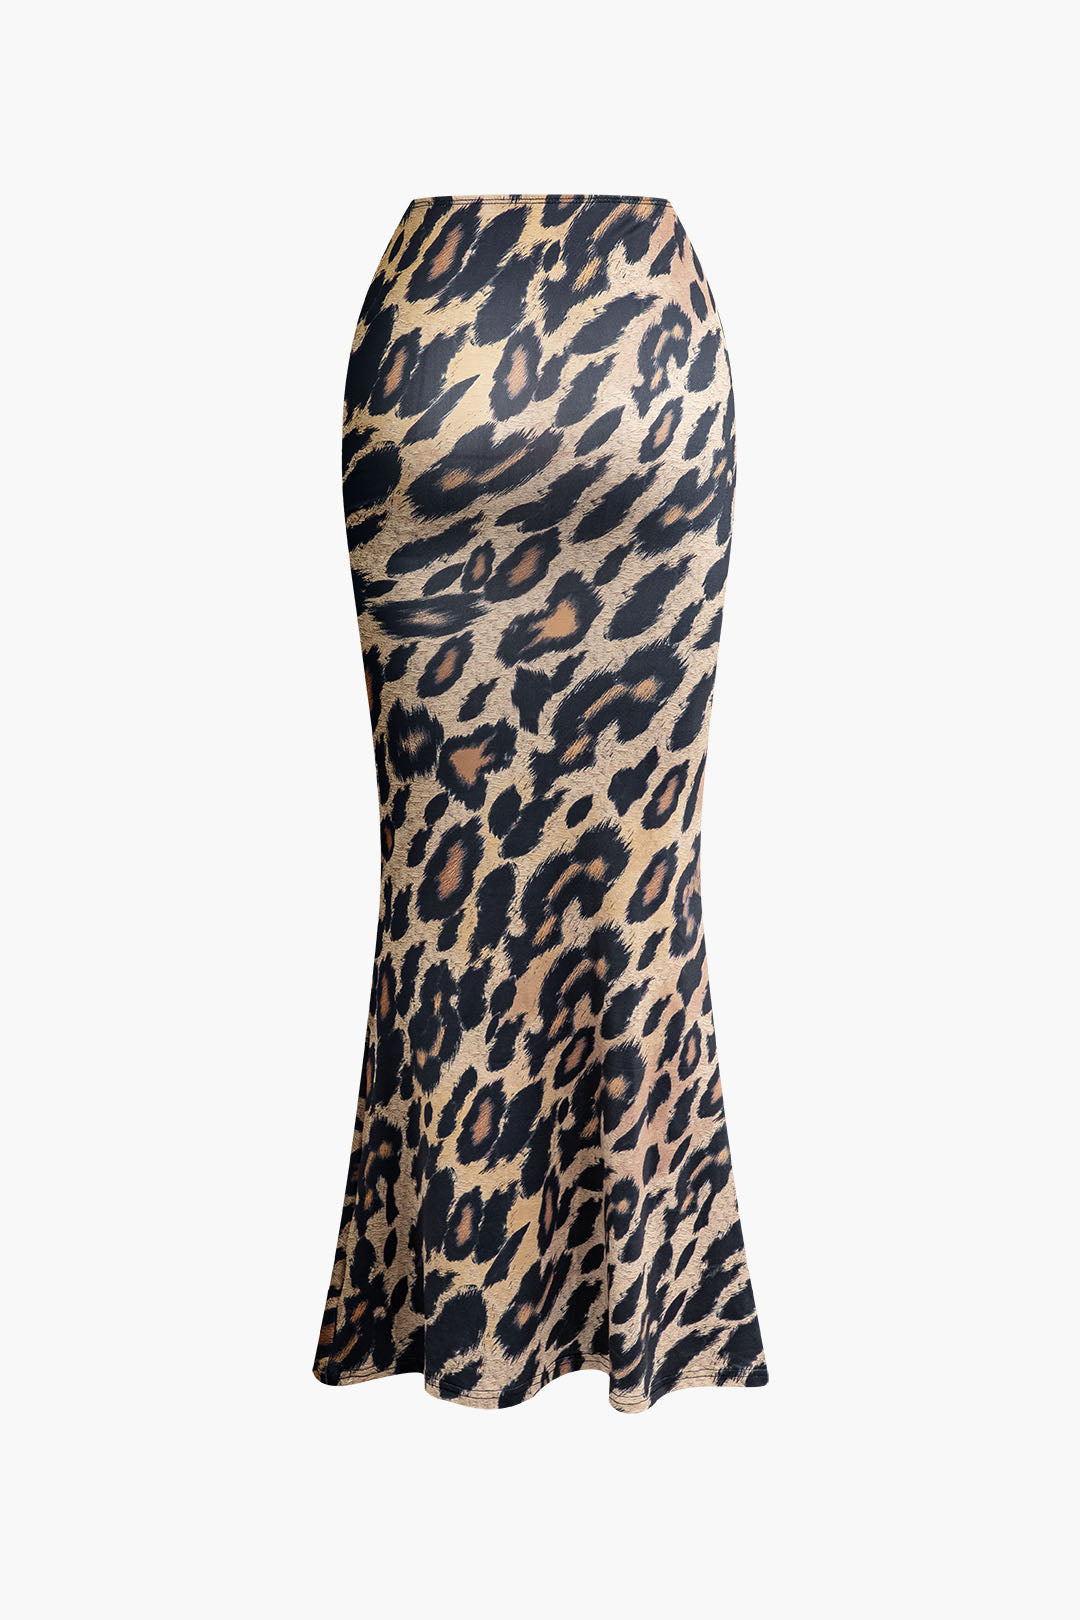 Leopard Print Tie Halter Backless Tank Top And Maxi Skirt Set